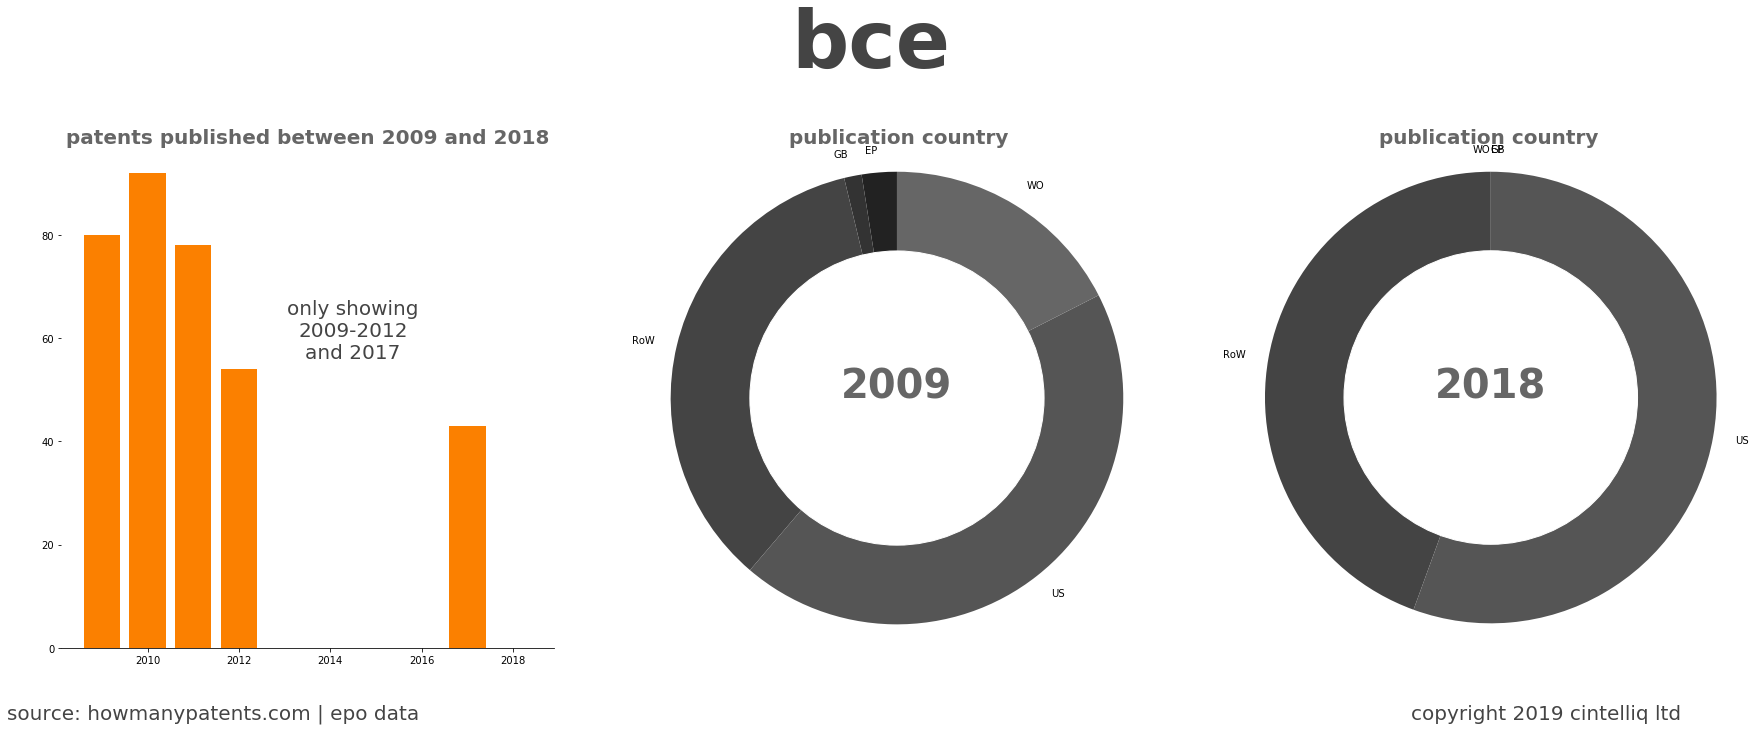 summary of patents for Bce